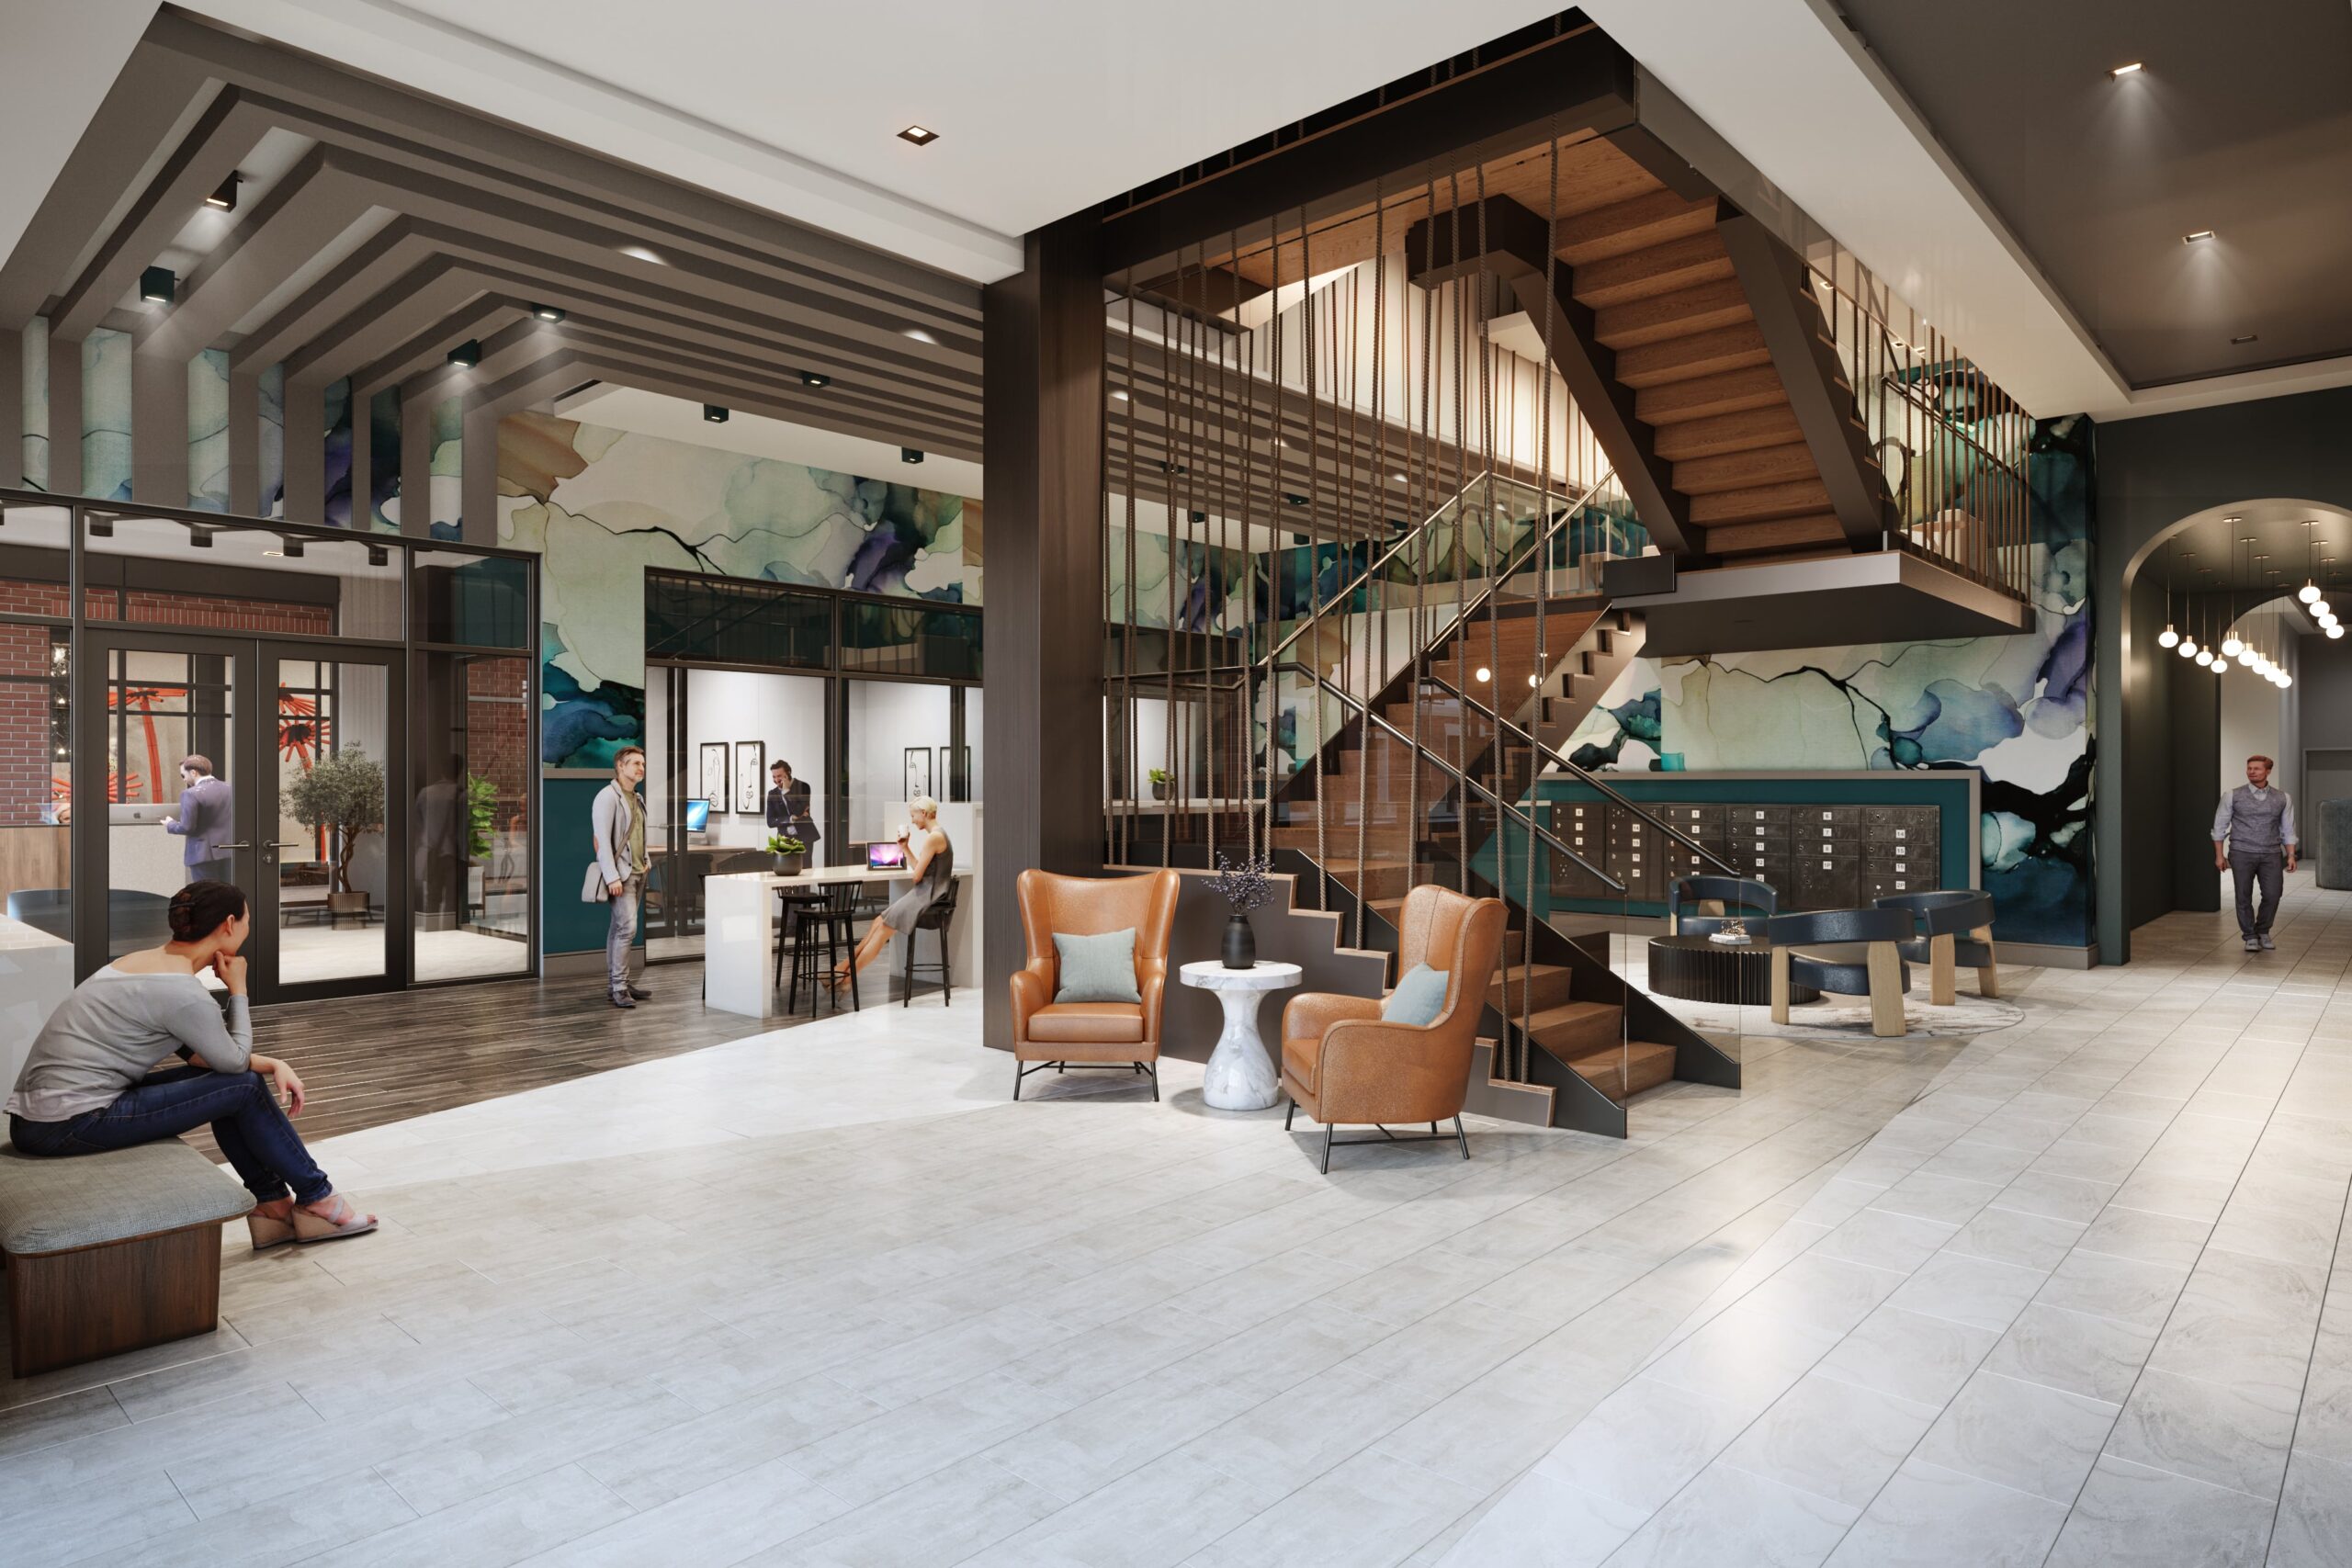 Lobby area with leather and teal finishes, and a centre stair case.